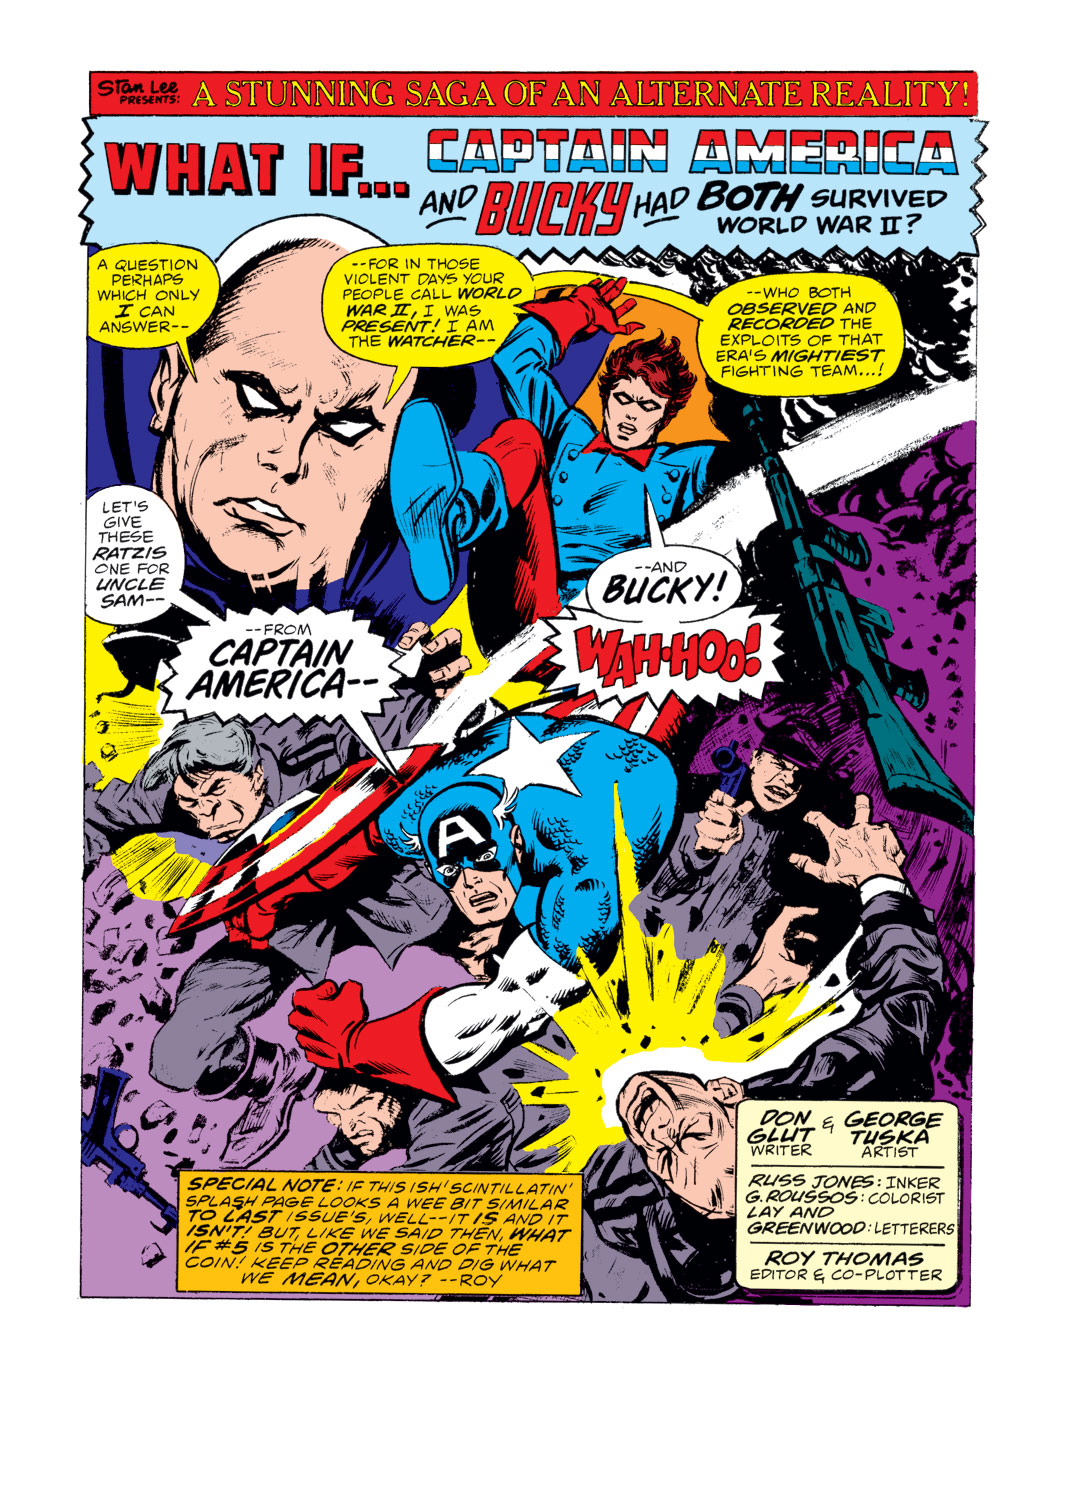 What If? (1977) issue 5 - Captain America hadn't vanished during World War Two - Page 2